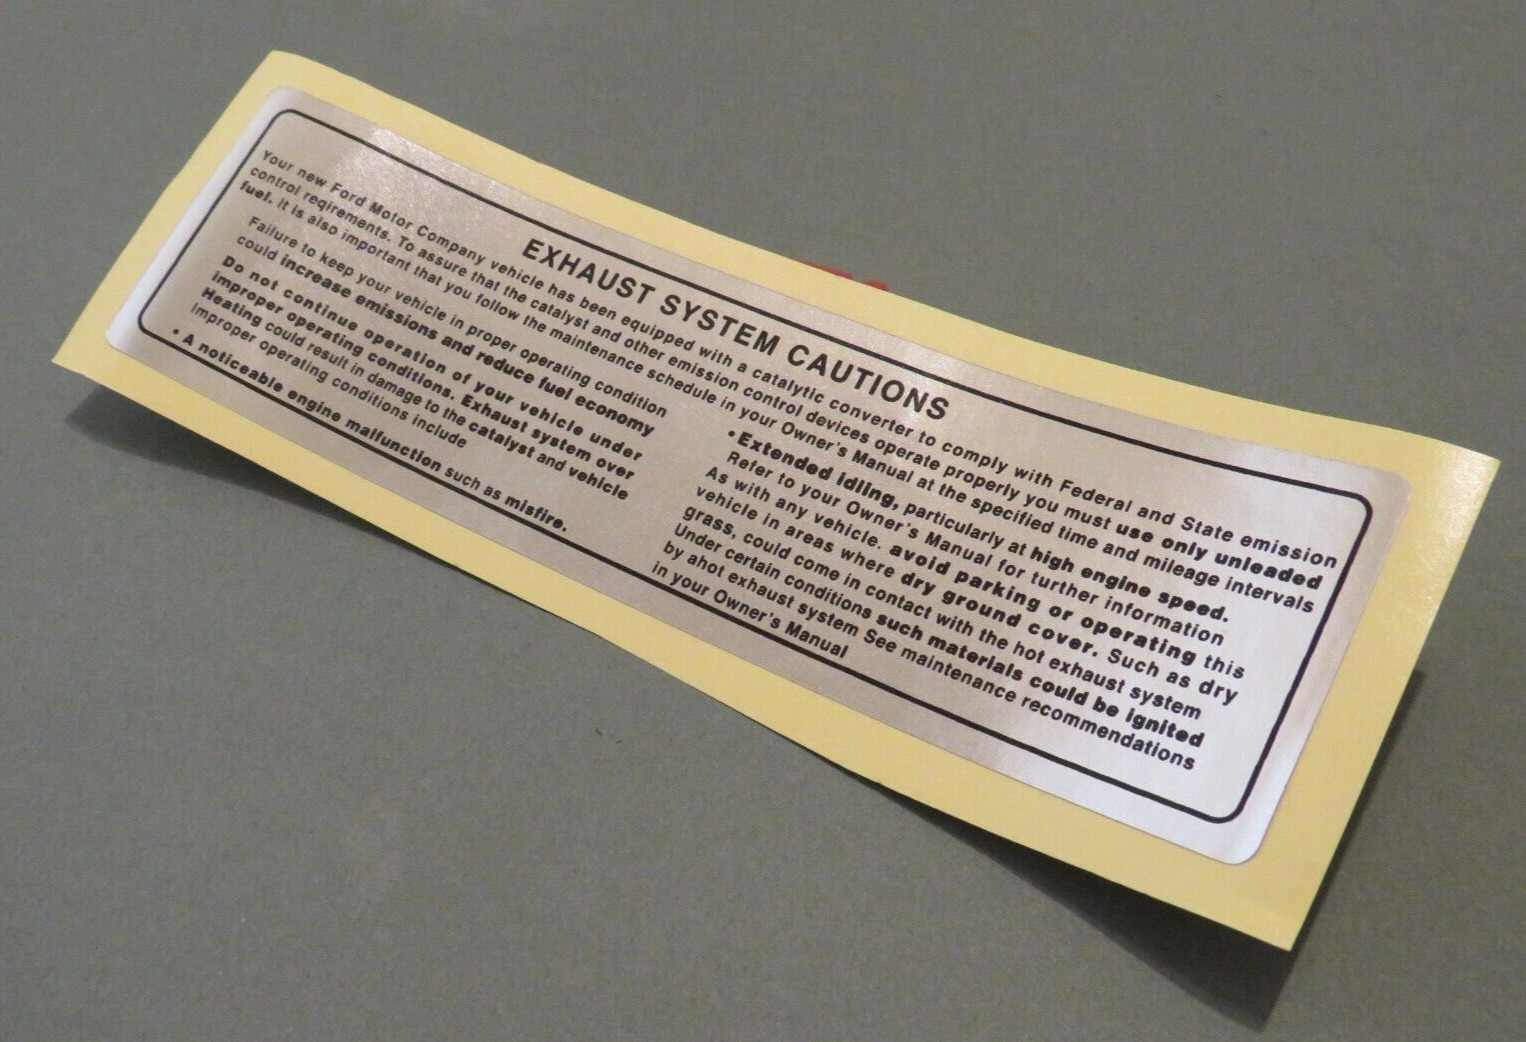 NEW 1977-1978 Ford LTD Exhaust System Cautions Sun Visor Decal